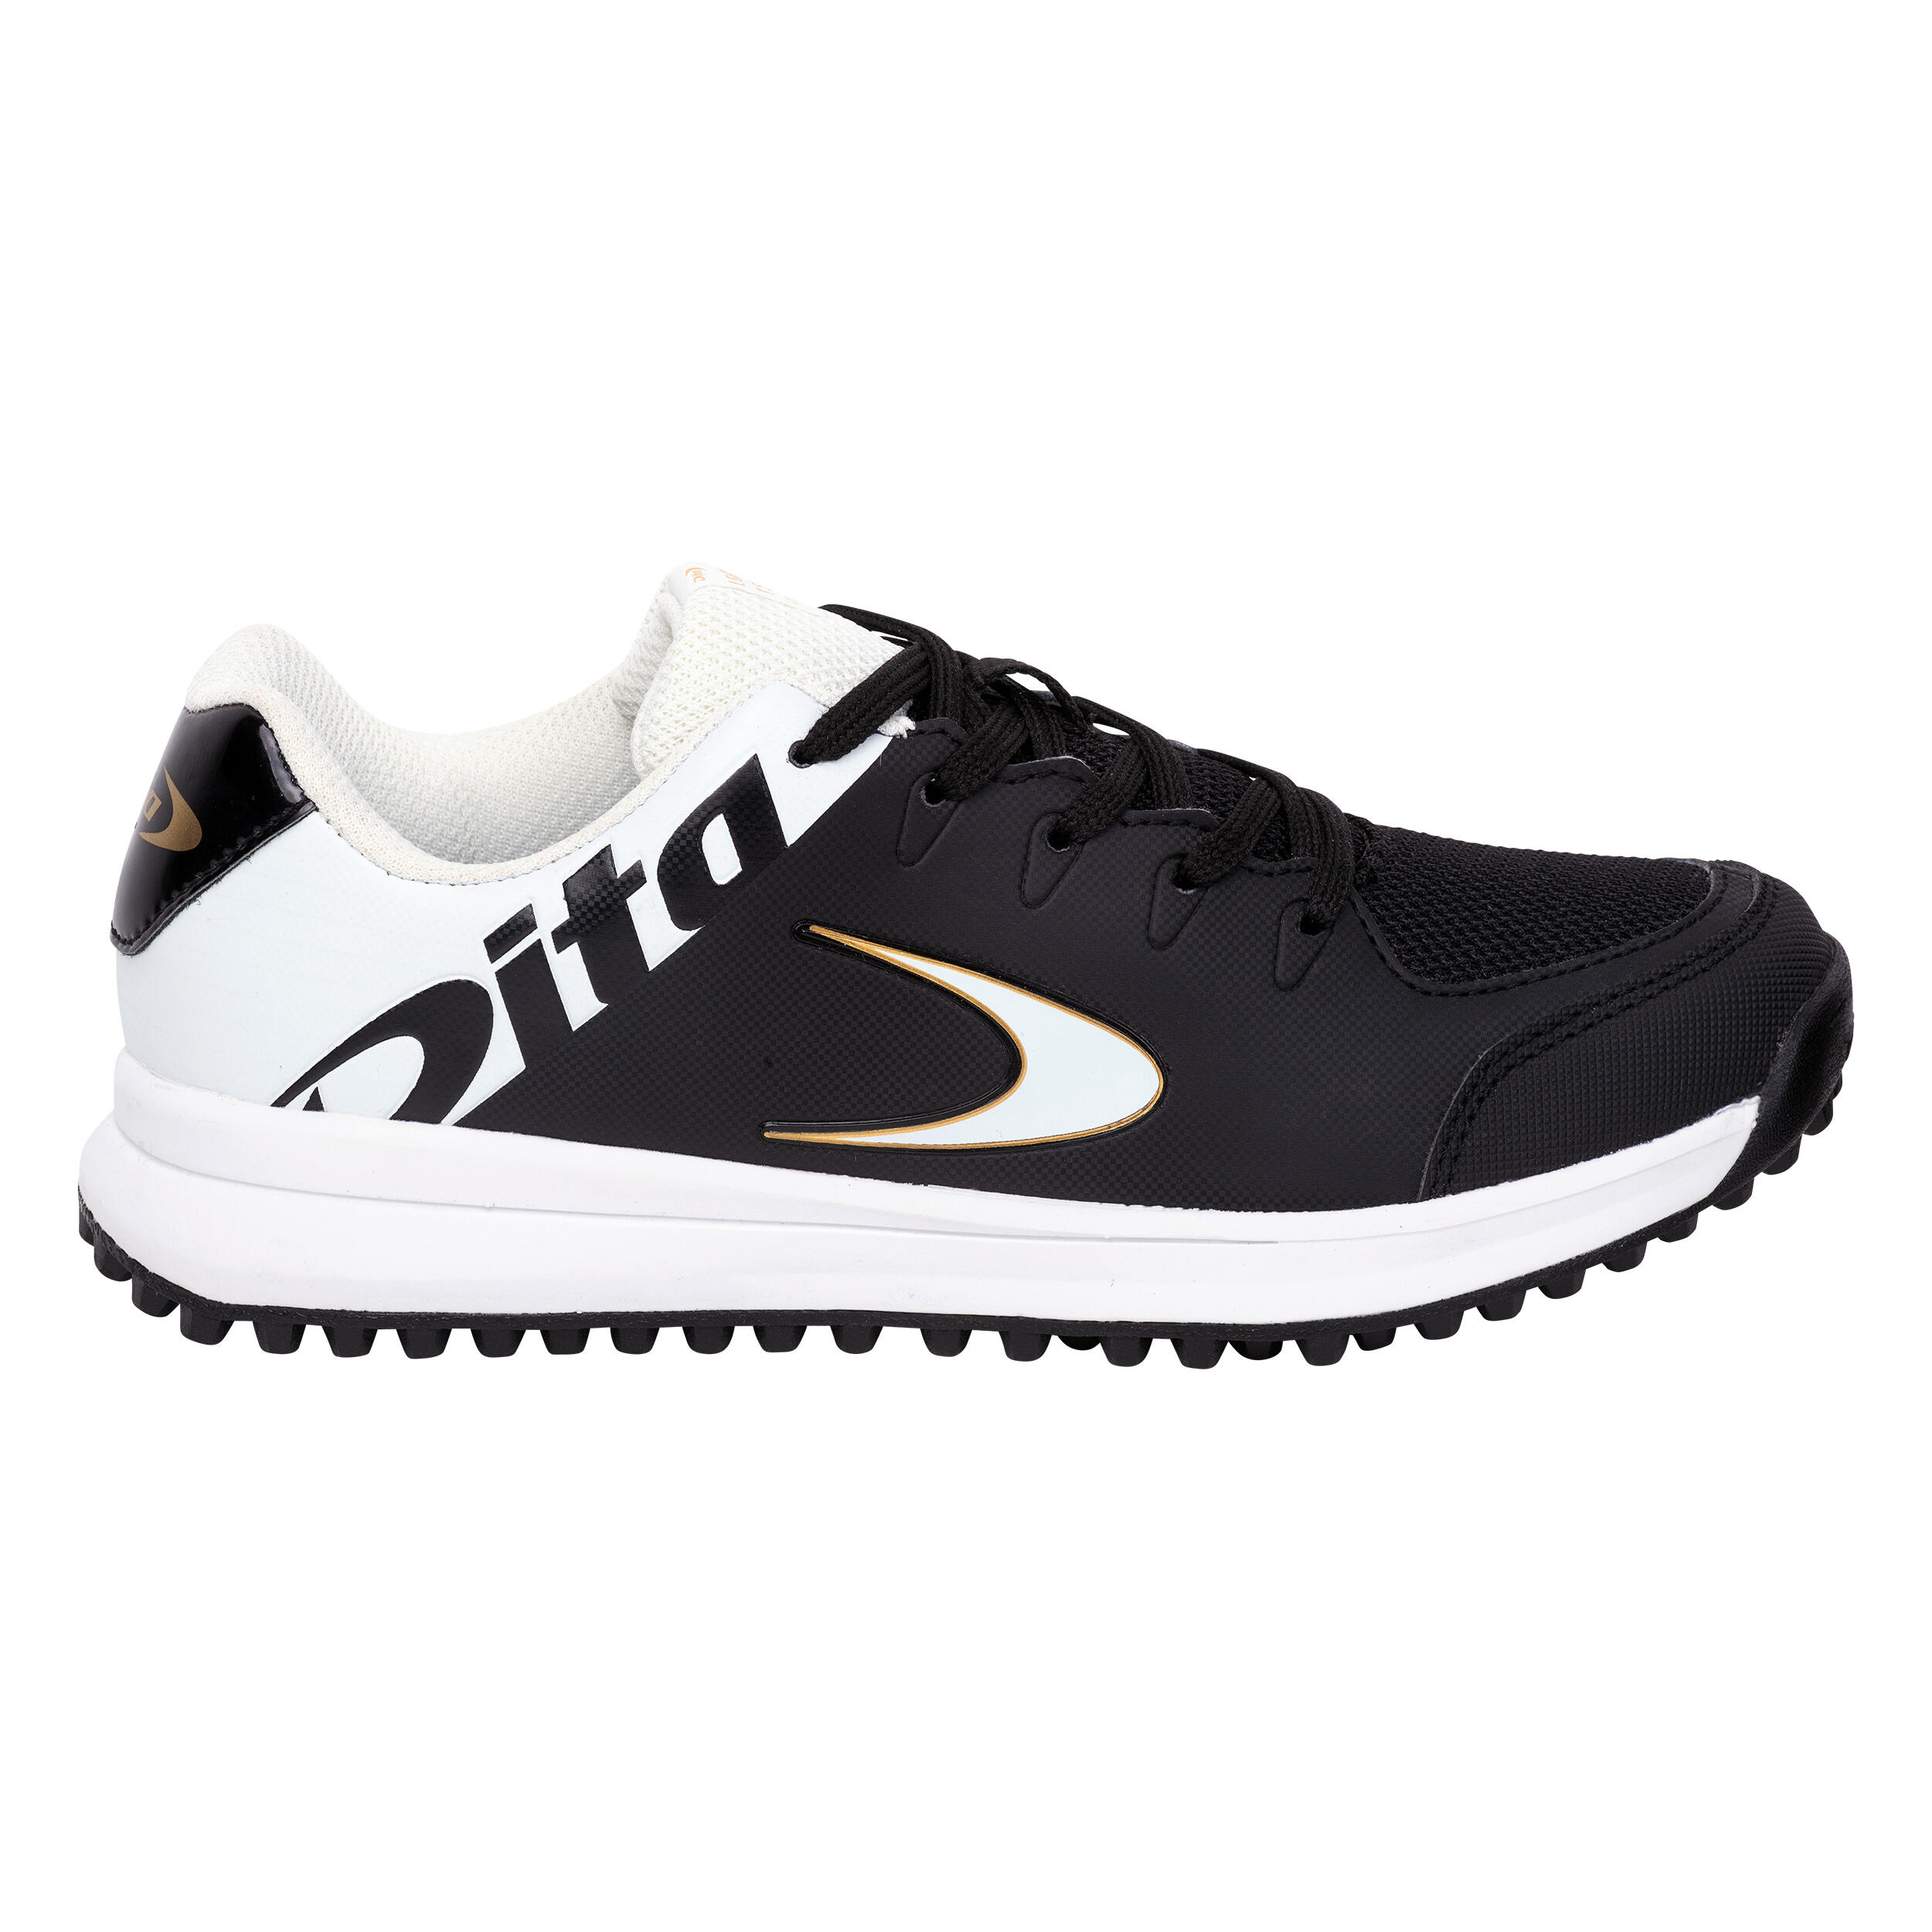 Teens' Moderate-Intensity Hockey Shoes STBL150 - White/Black 1/7